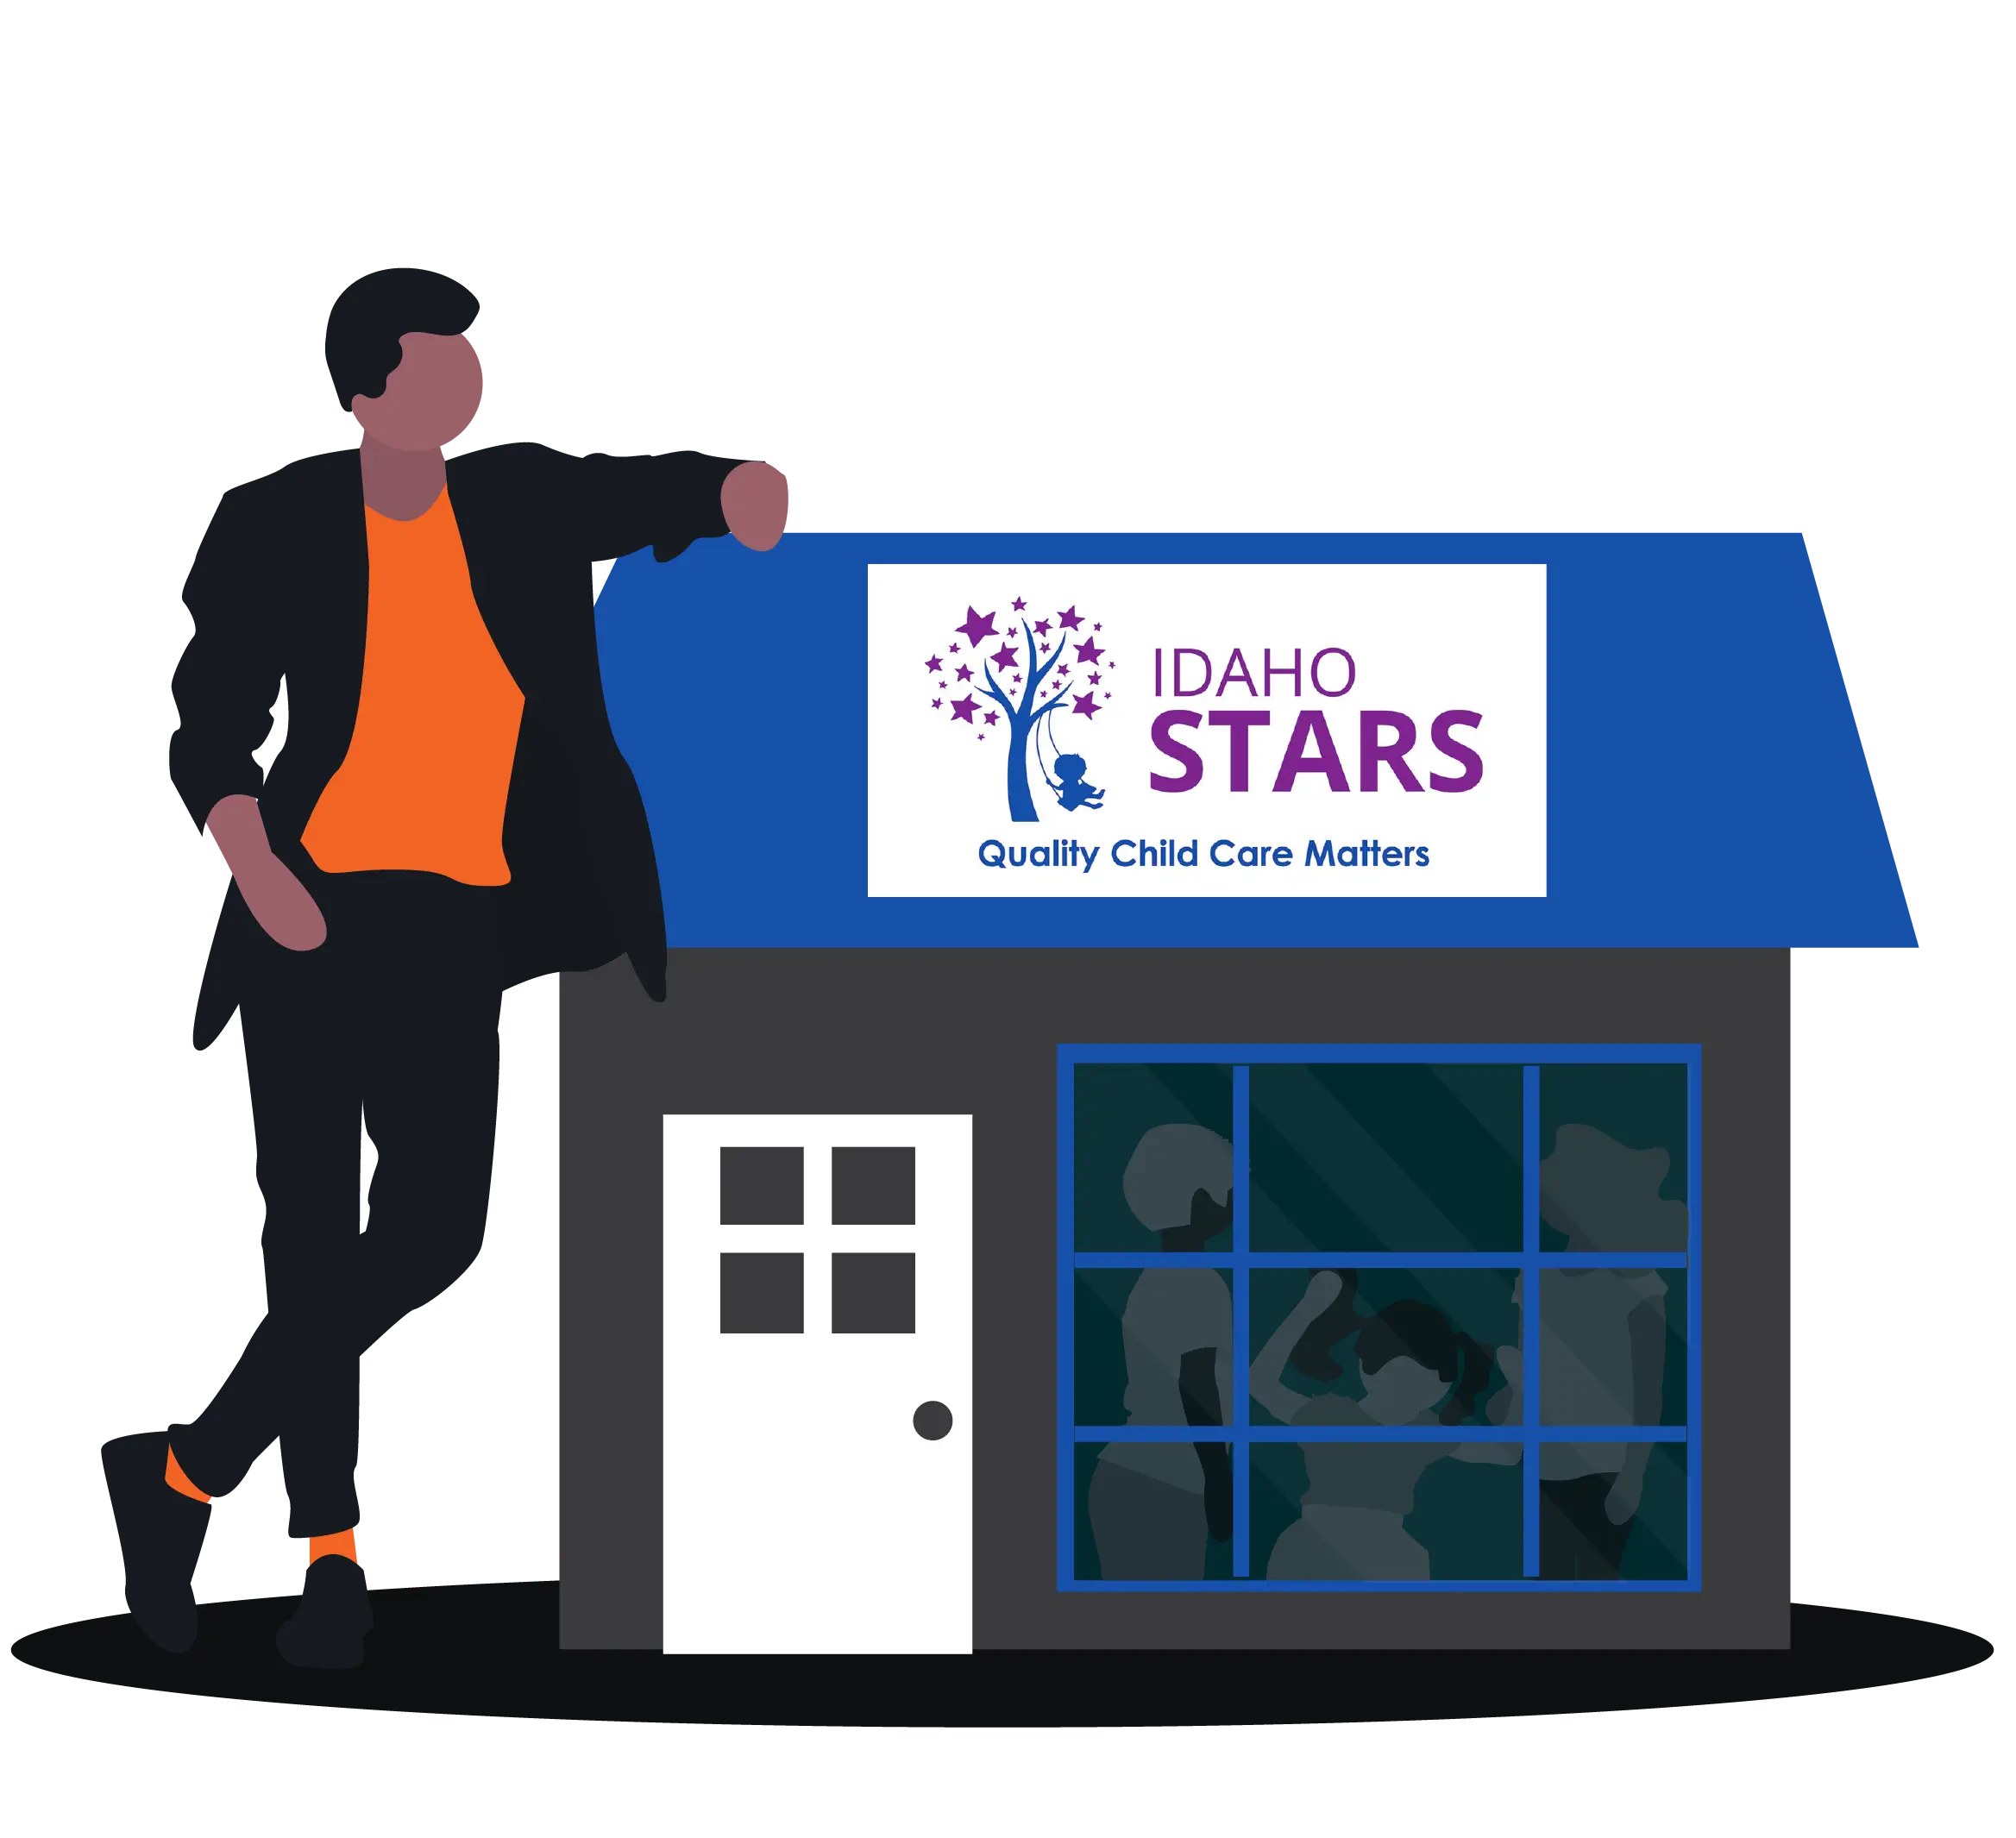 The client - About IdahoSTARS